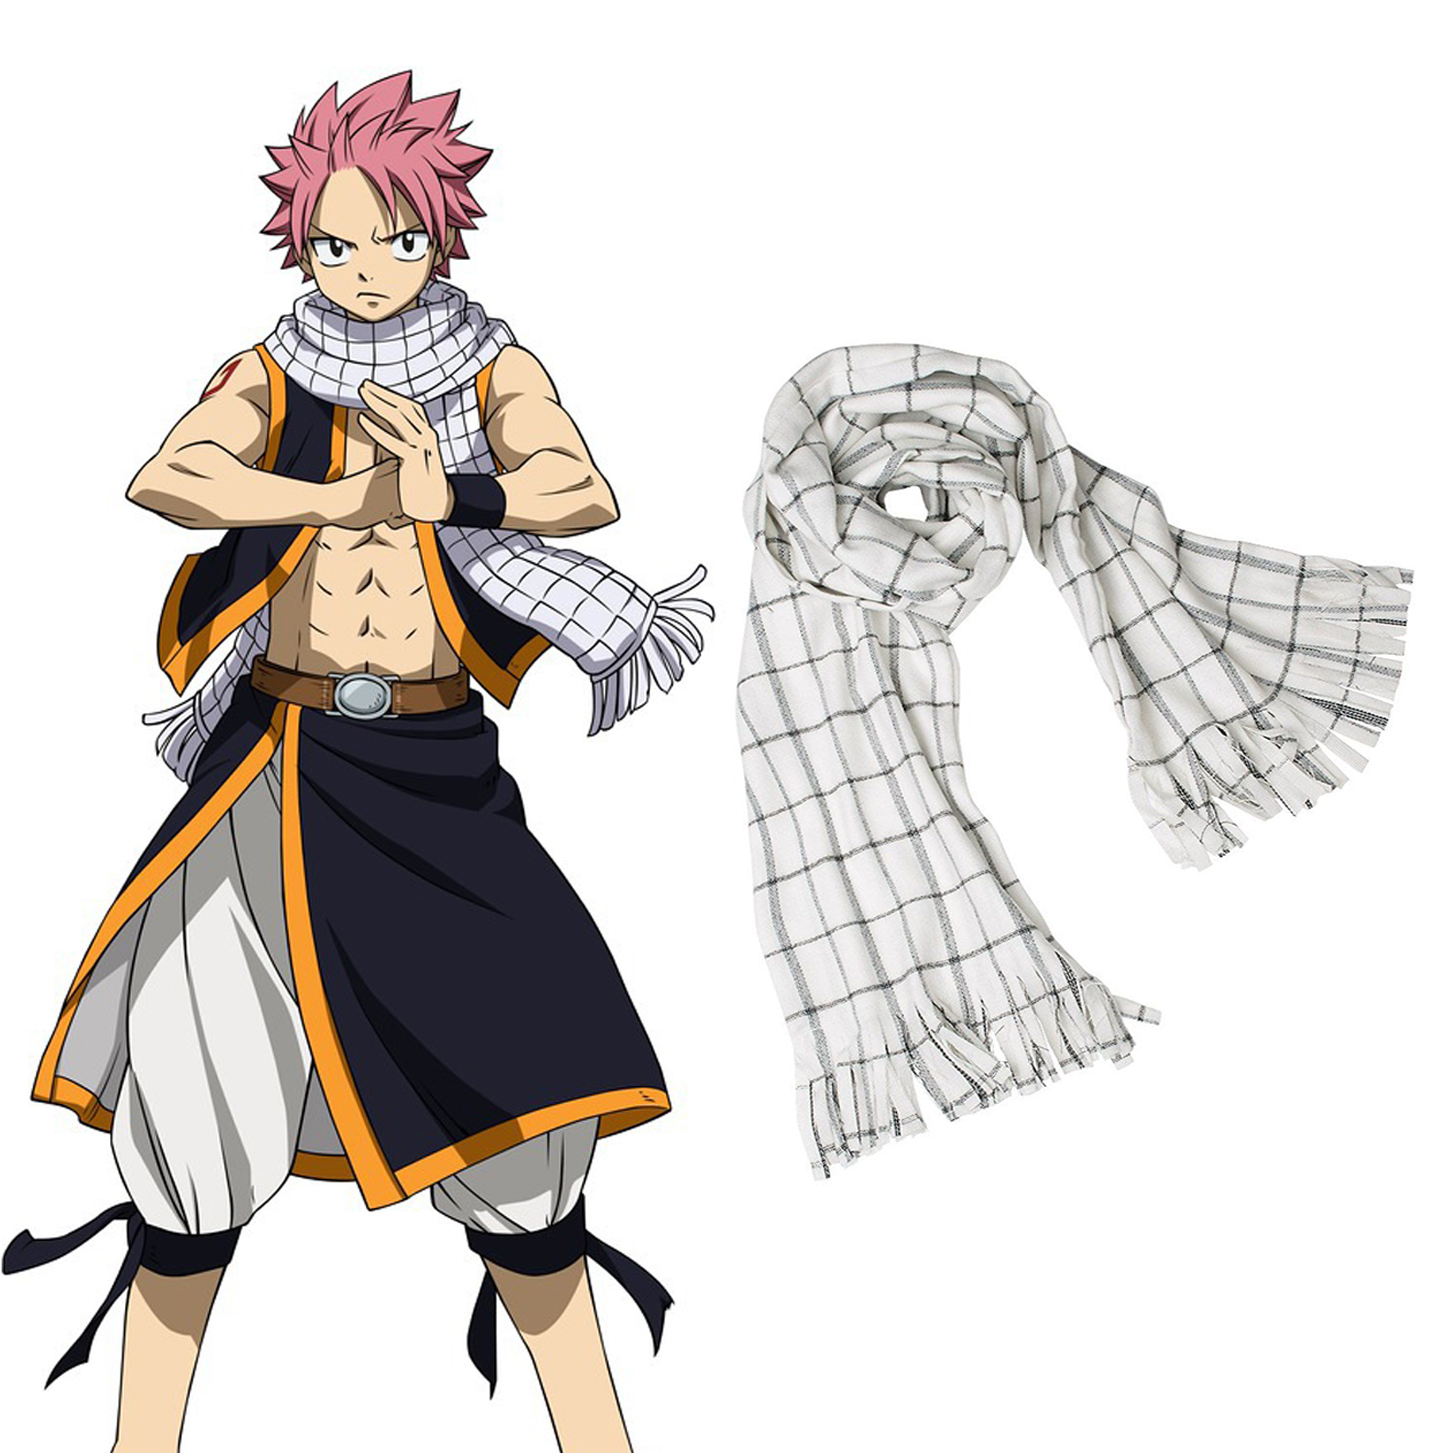 Fairy Tail Natsu Dragneel Cosplay Scarf.